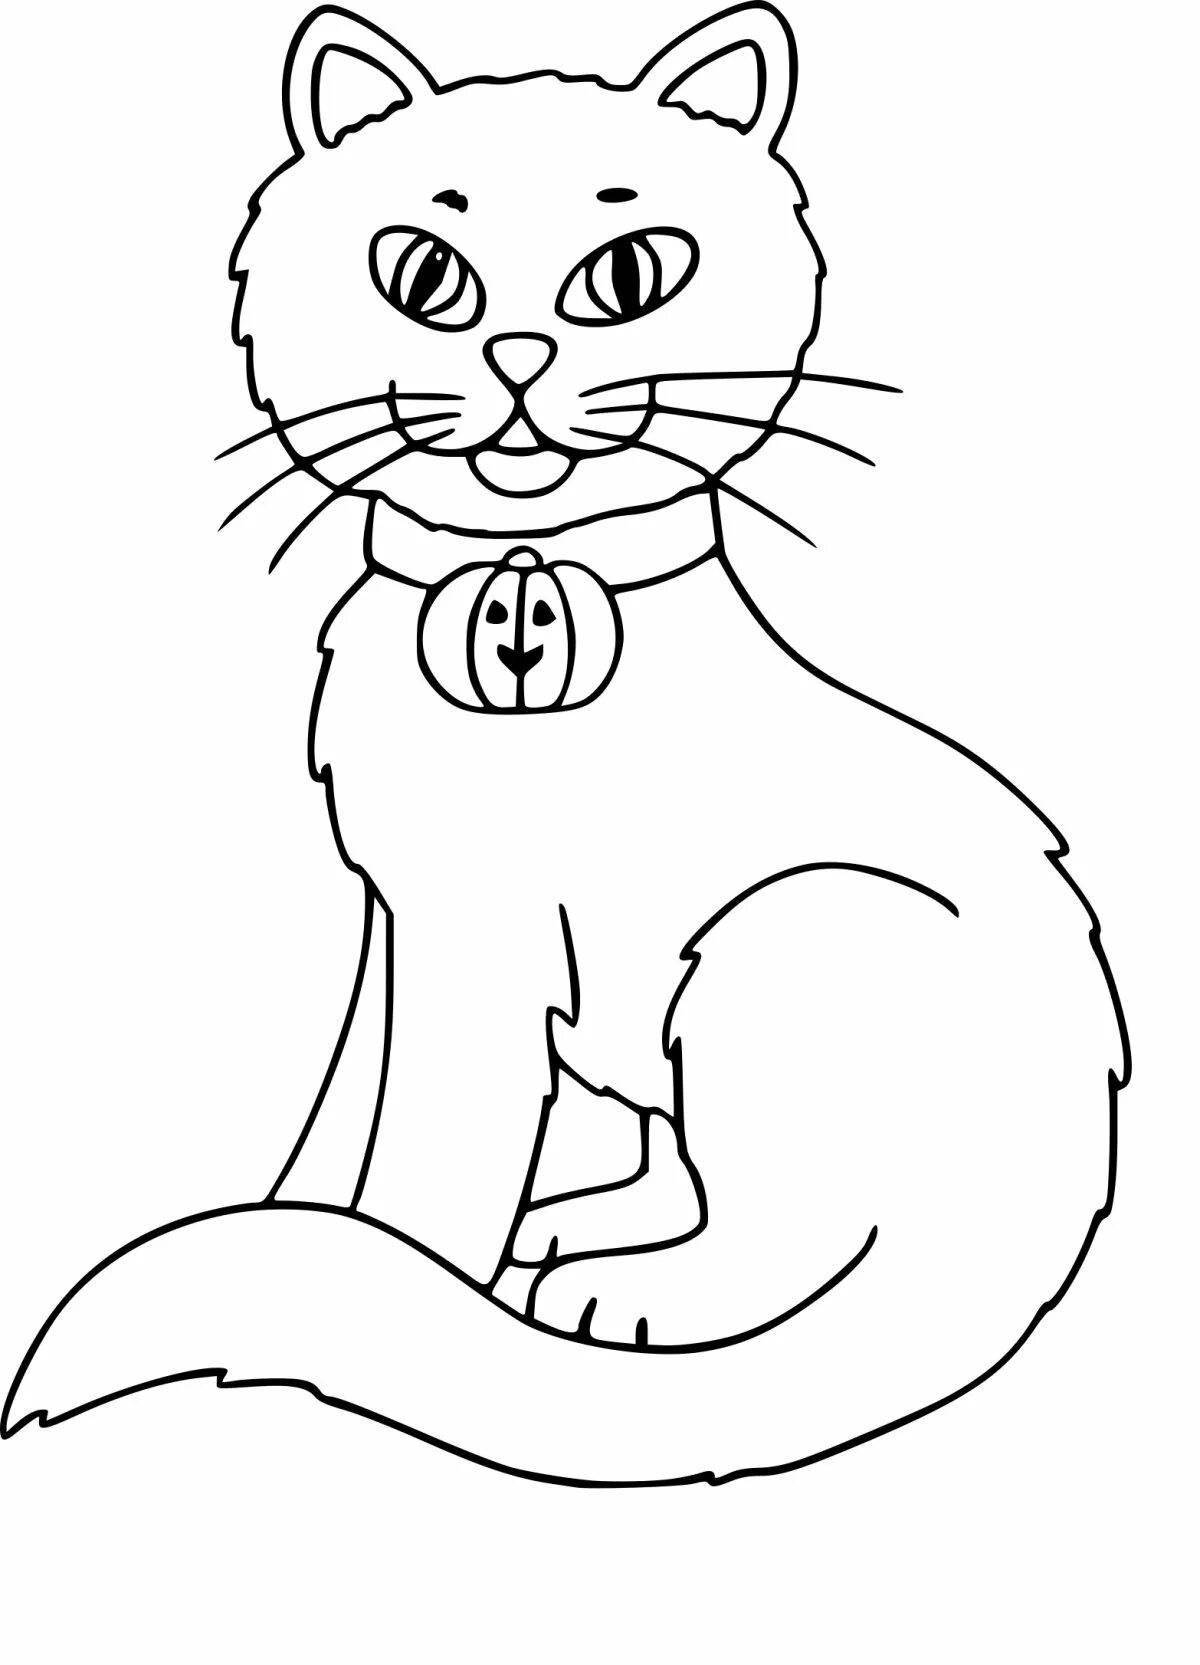 Soft coloring cat for children 2-3 years old